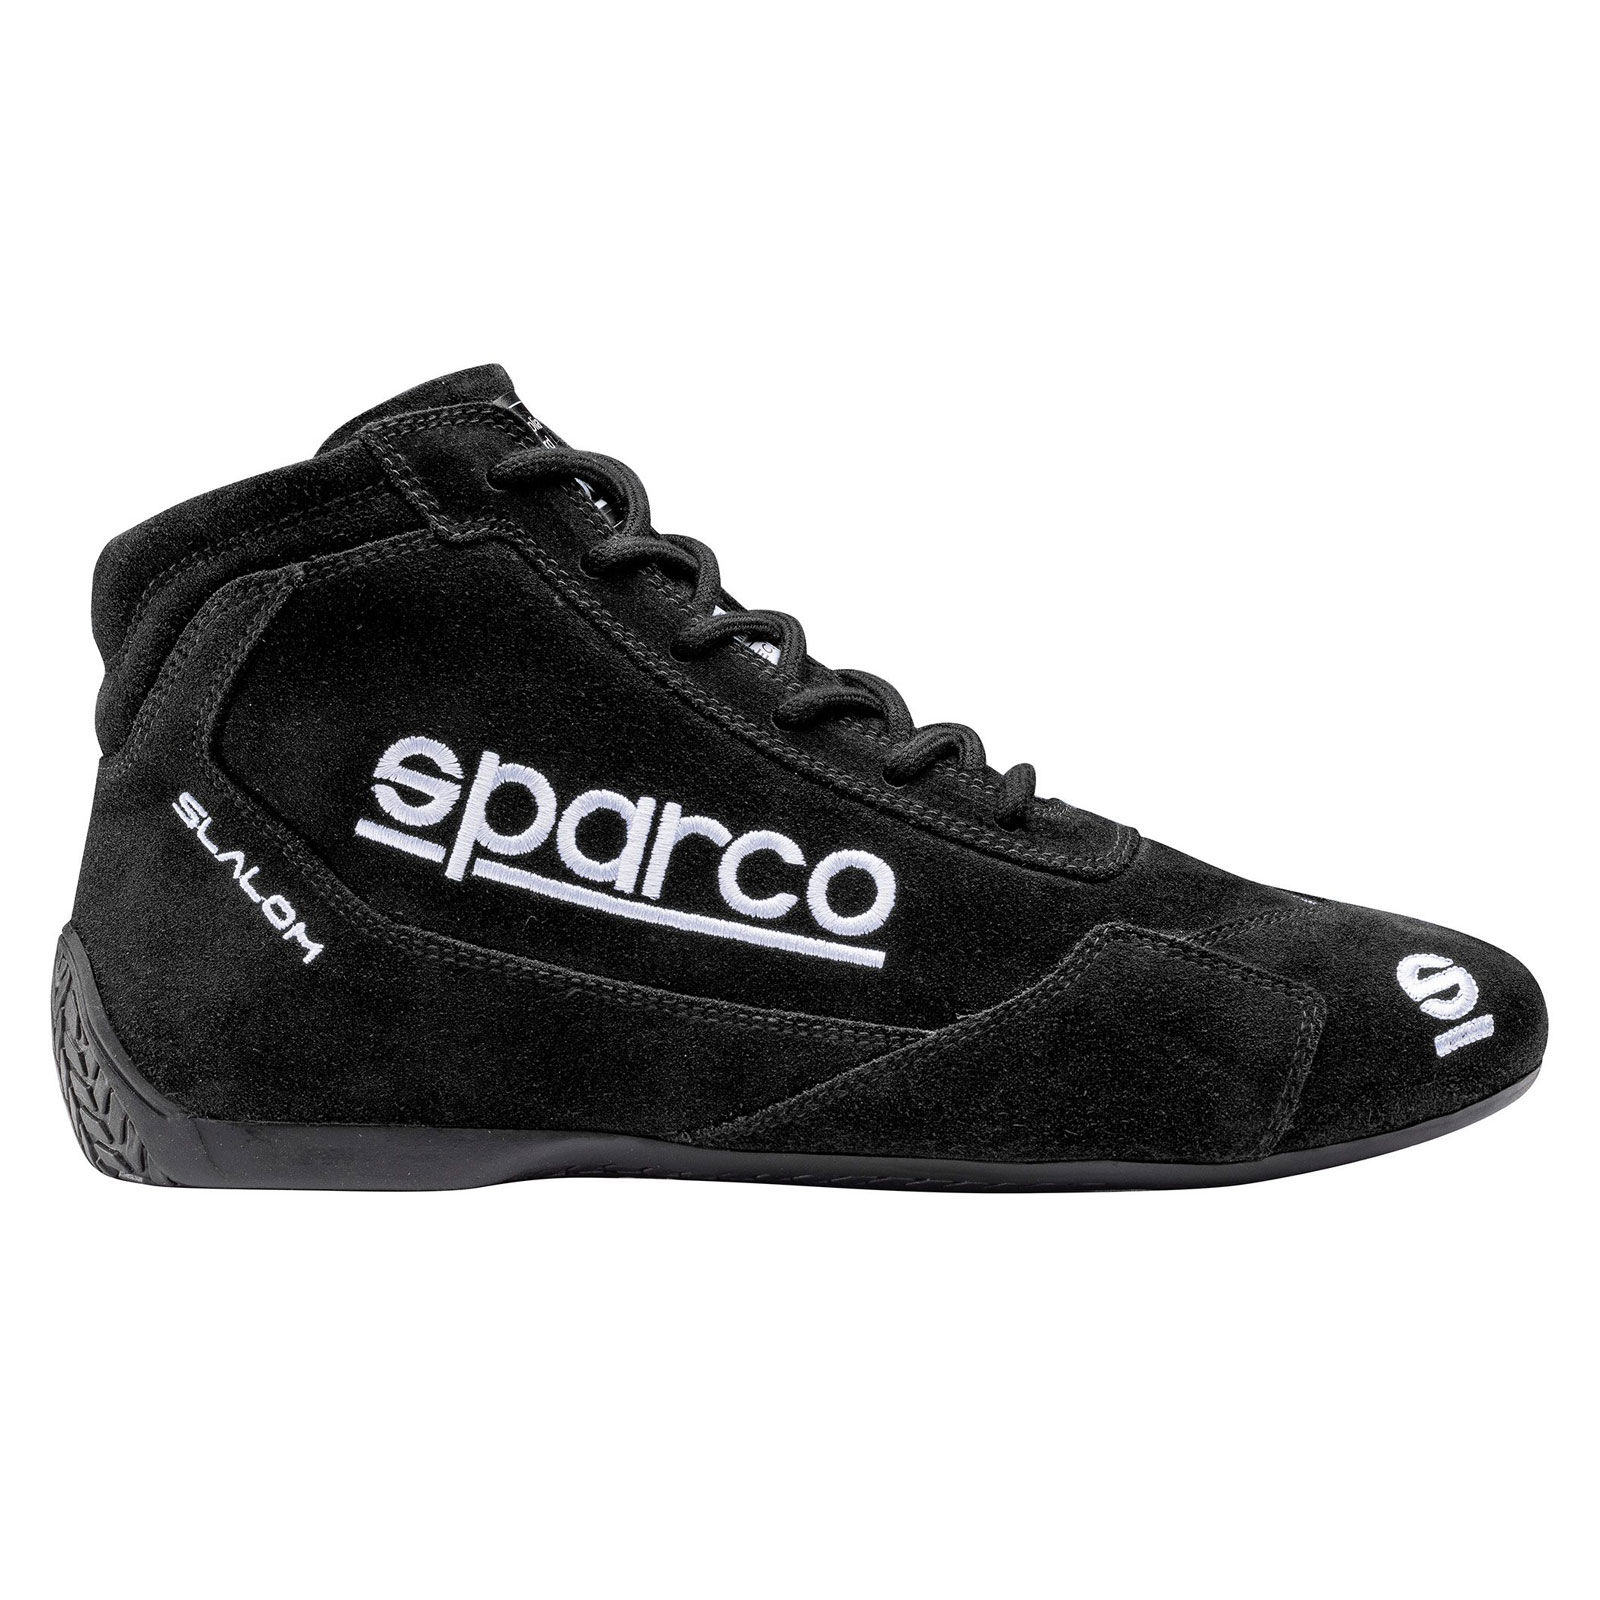 Sparco Slalom RB-3 Race Boots | 001264 